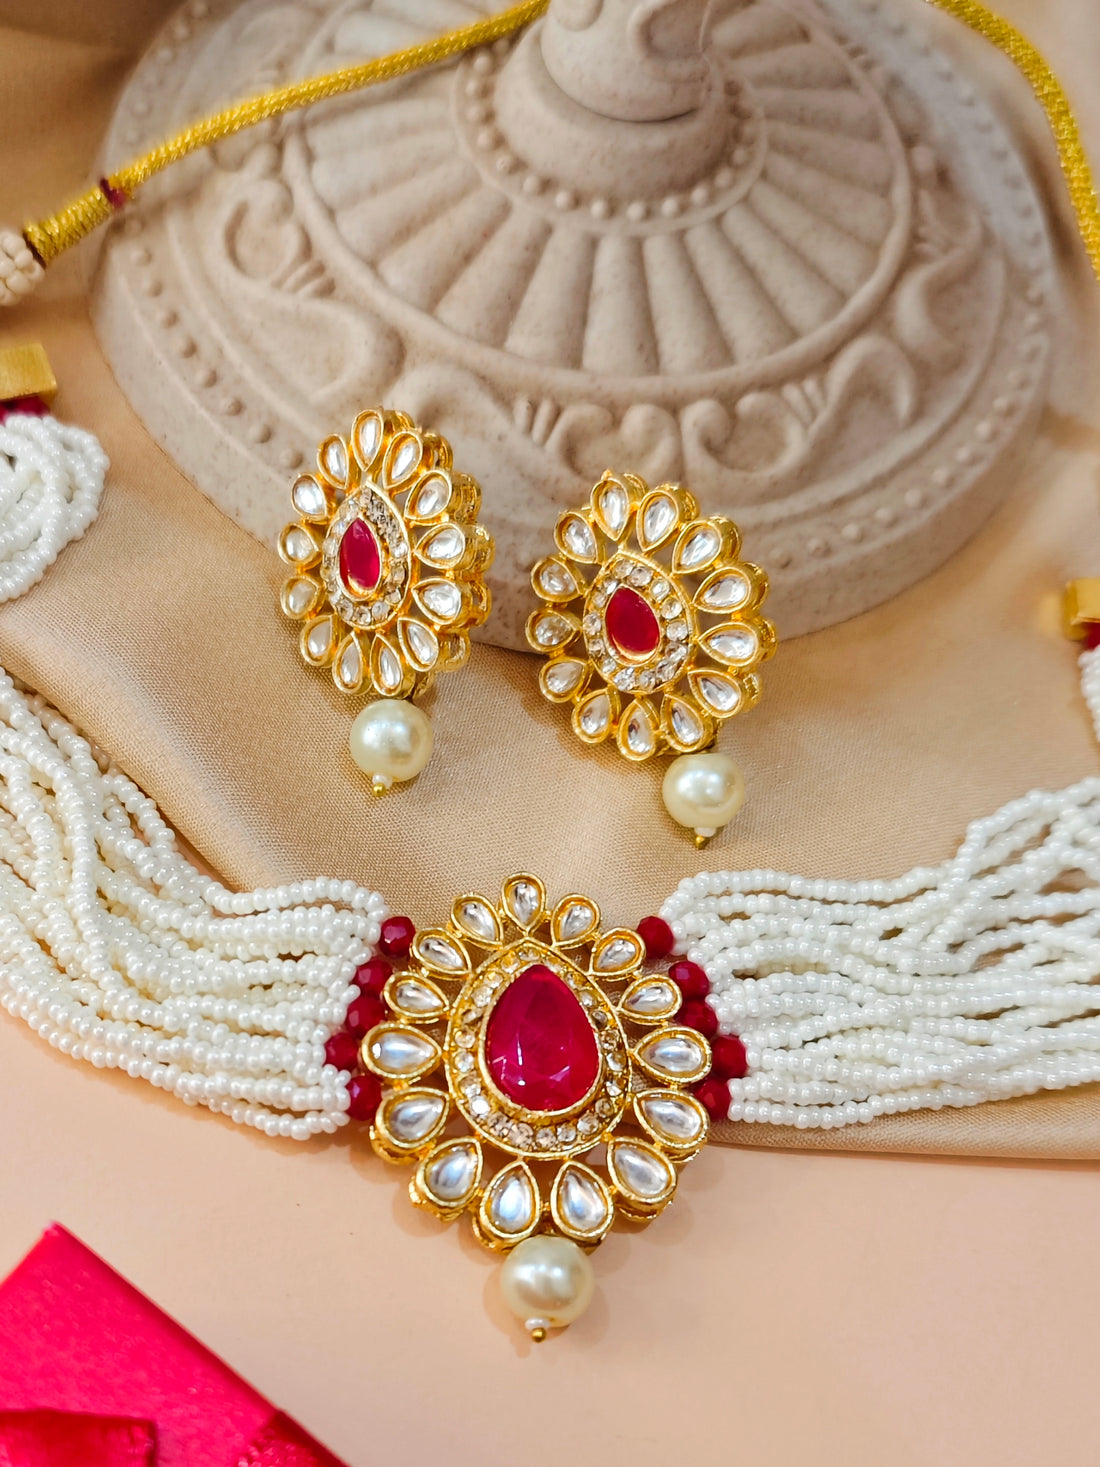 Moti Haari Chokar Necklace Set from house of Mrigaya by Nandini for Traditional and Festive Indian Look | for Gifting- Gold & Red - Mrigaya India